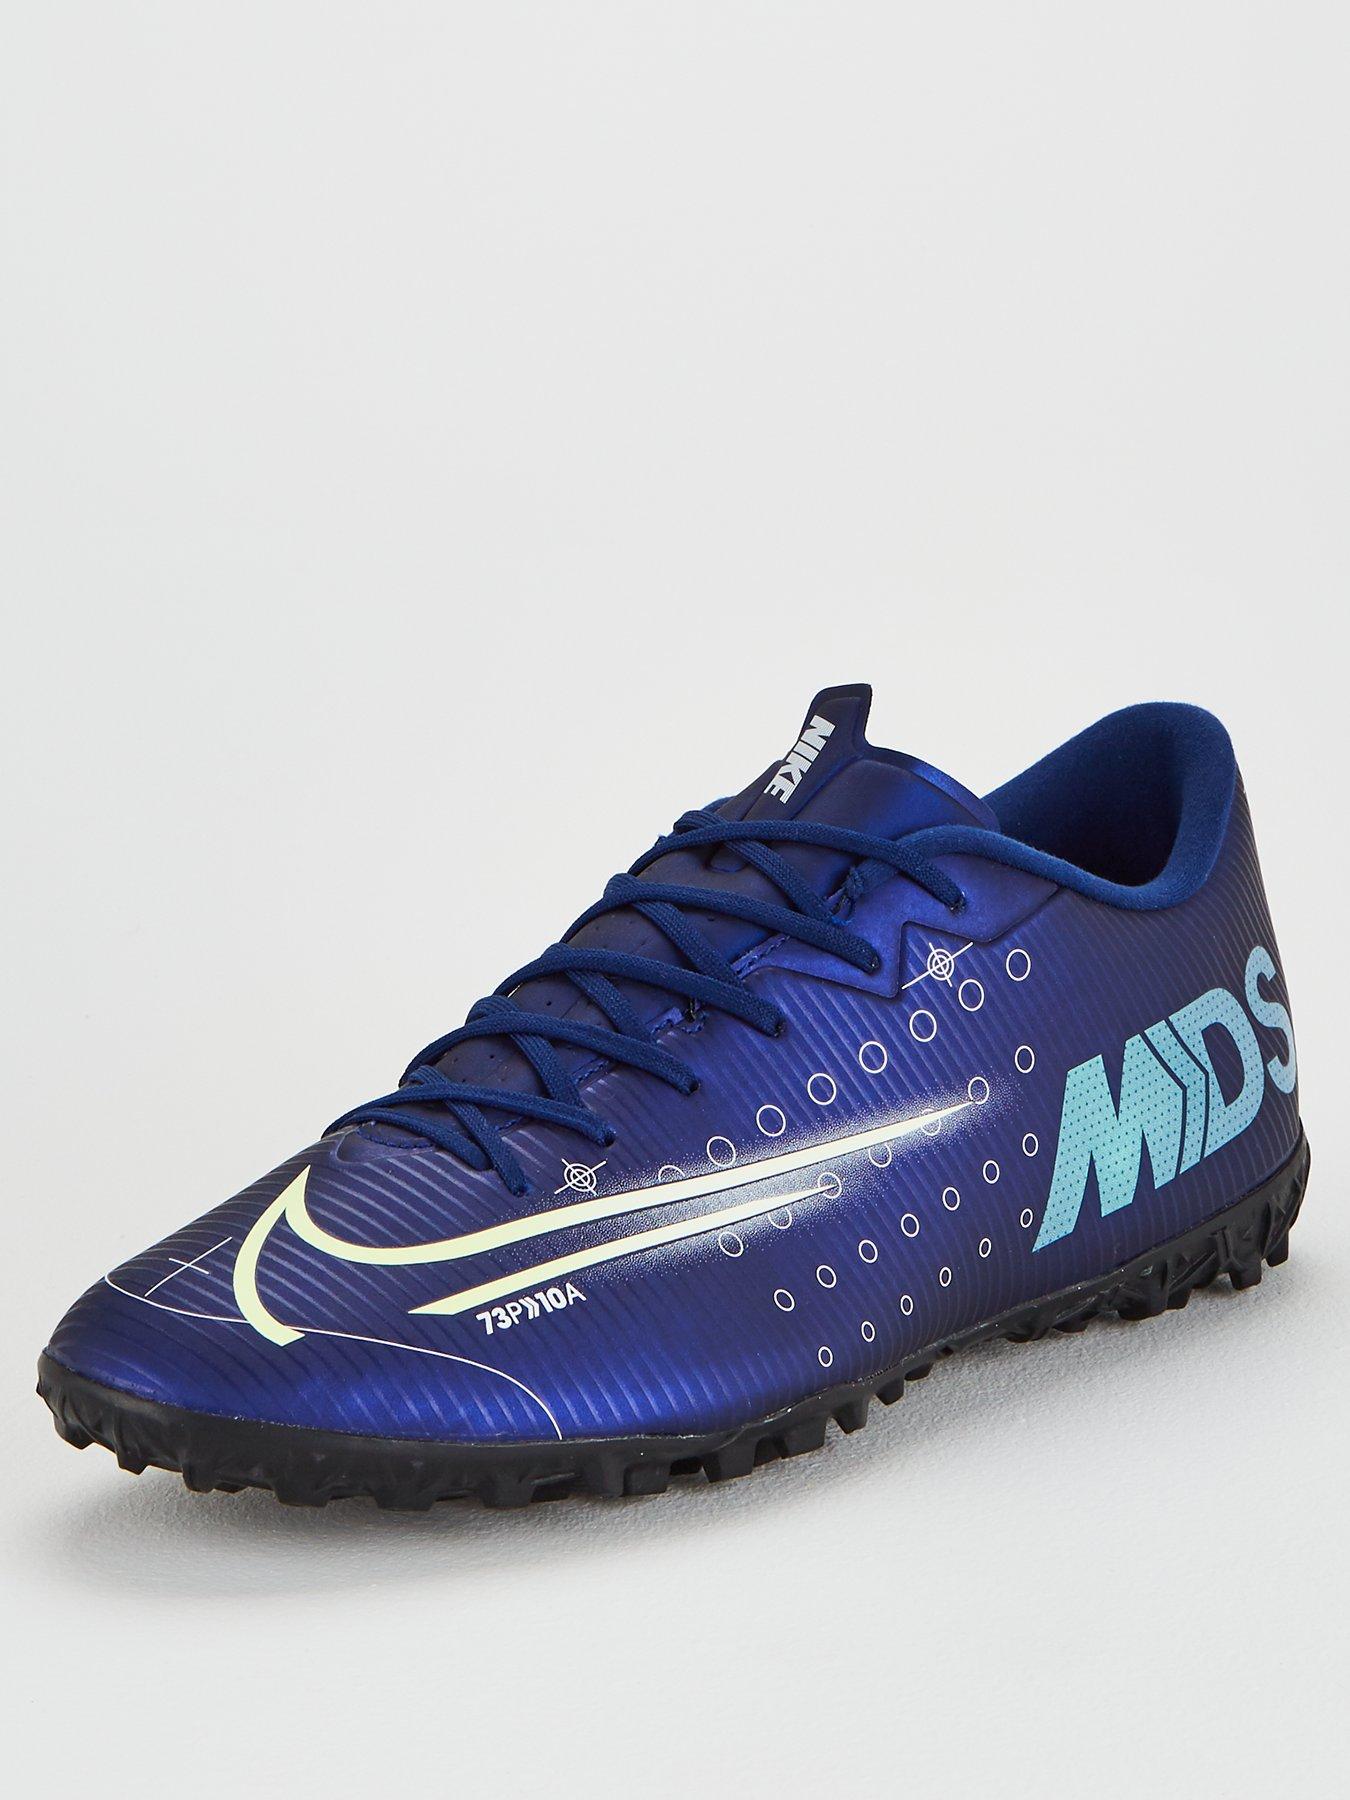 nike astro turf boots